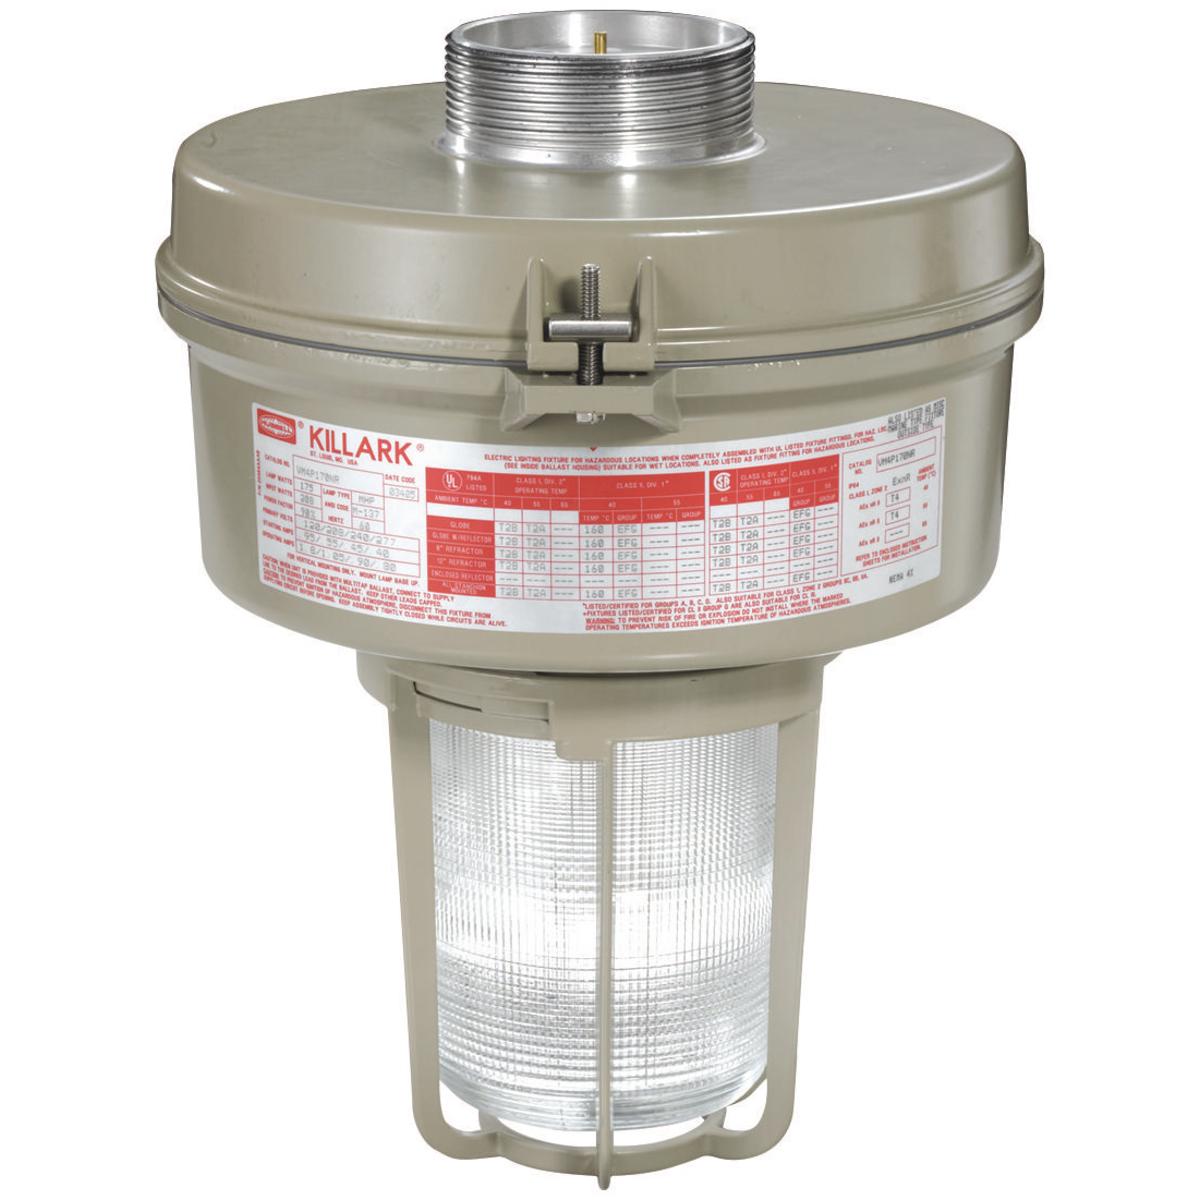 Hubbell VM3P155EZR5G VM3 Series - 150W Metal Halide 480V - EZ Mount Adapter -  Type V Glass Refractor and Guard  ; Ballast tank and splice box – corrosion resistant copper-free aluminum alloy with baked powder epoxy/polyester finish, electrostatically applied for complete, un